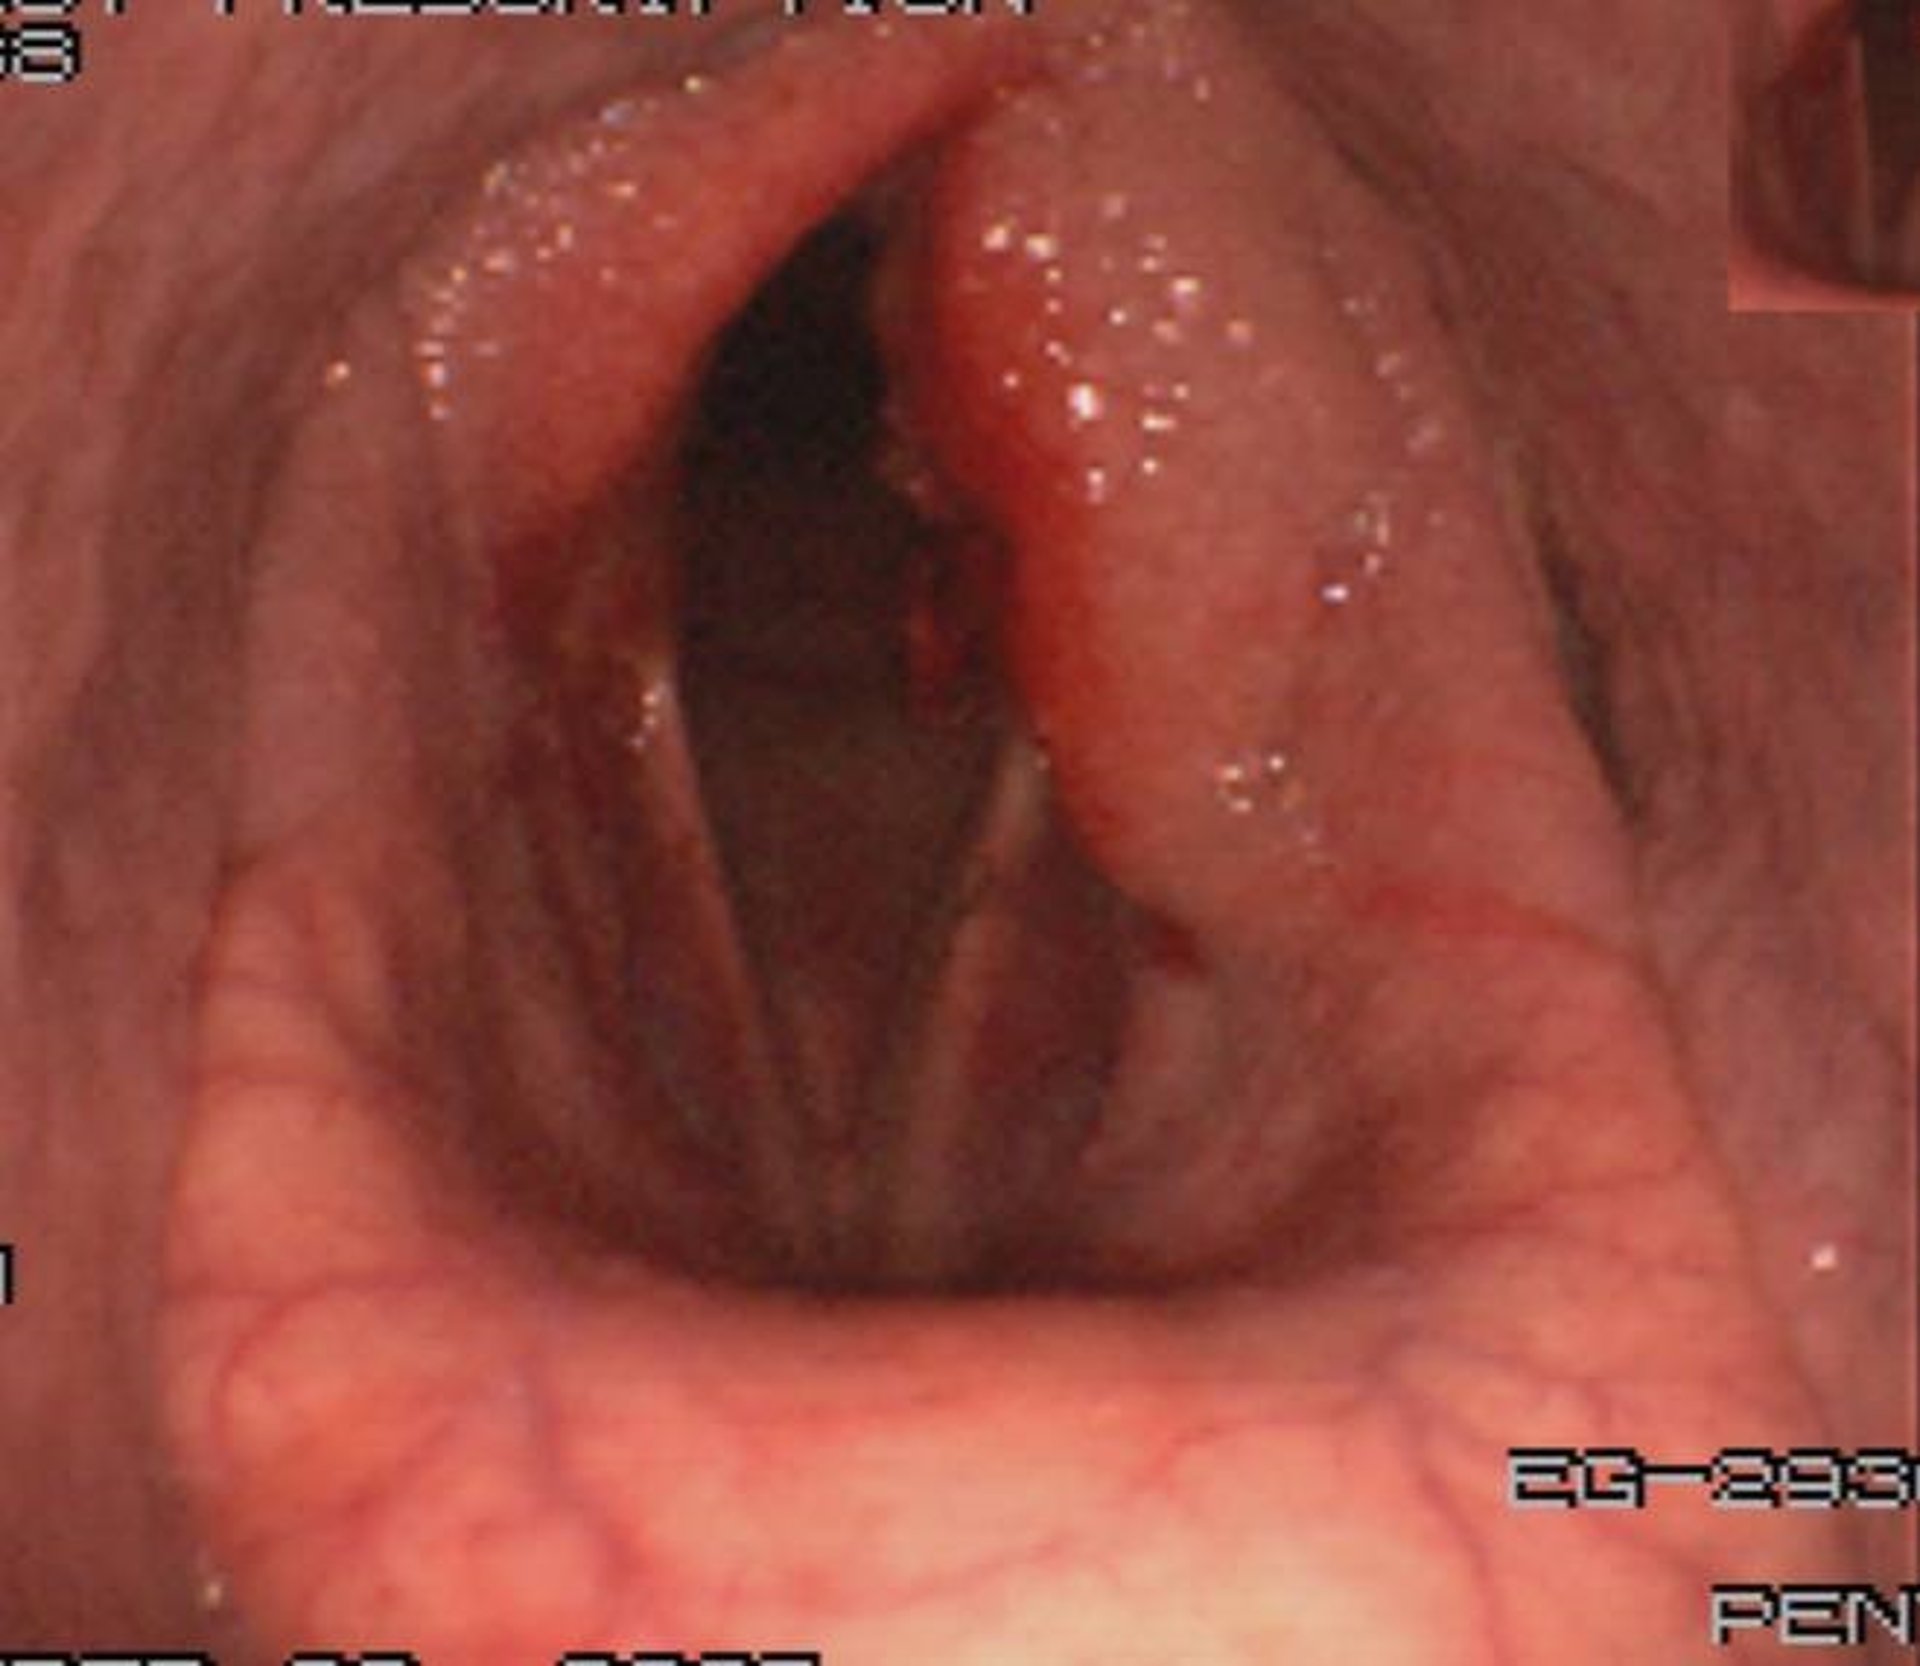 Arytenoid chondritis with swelling, horse